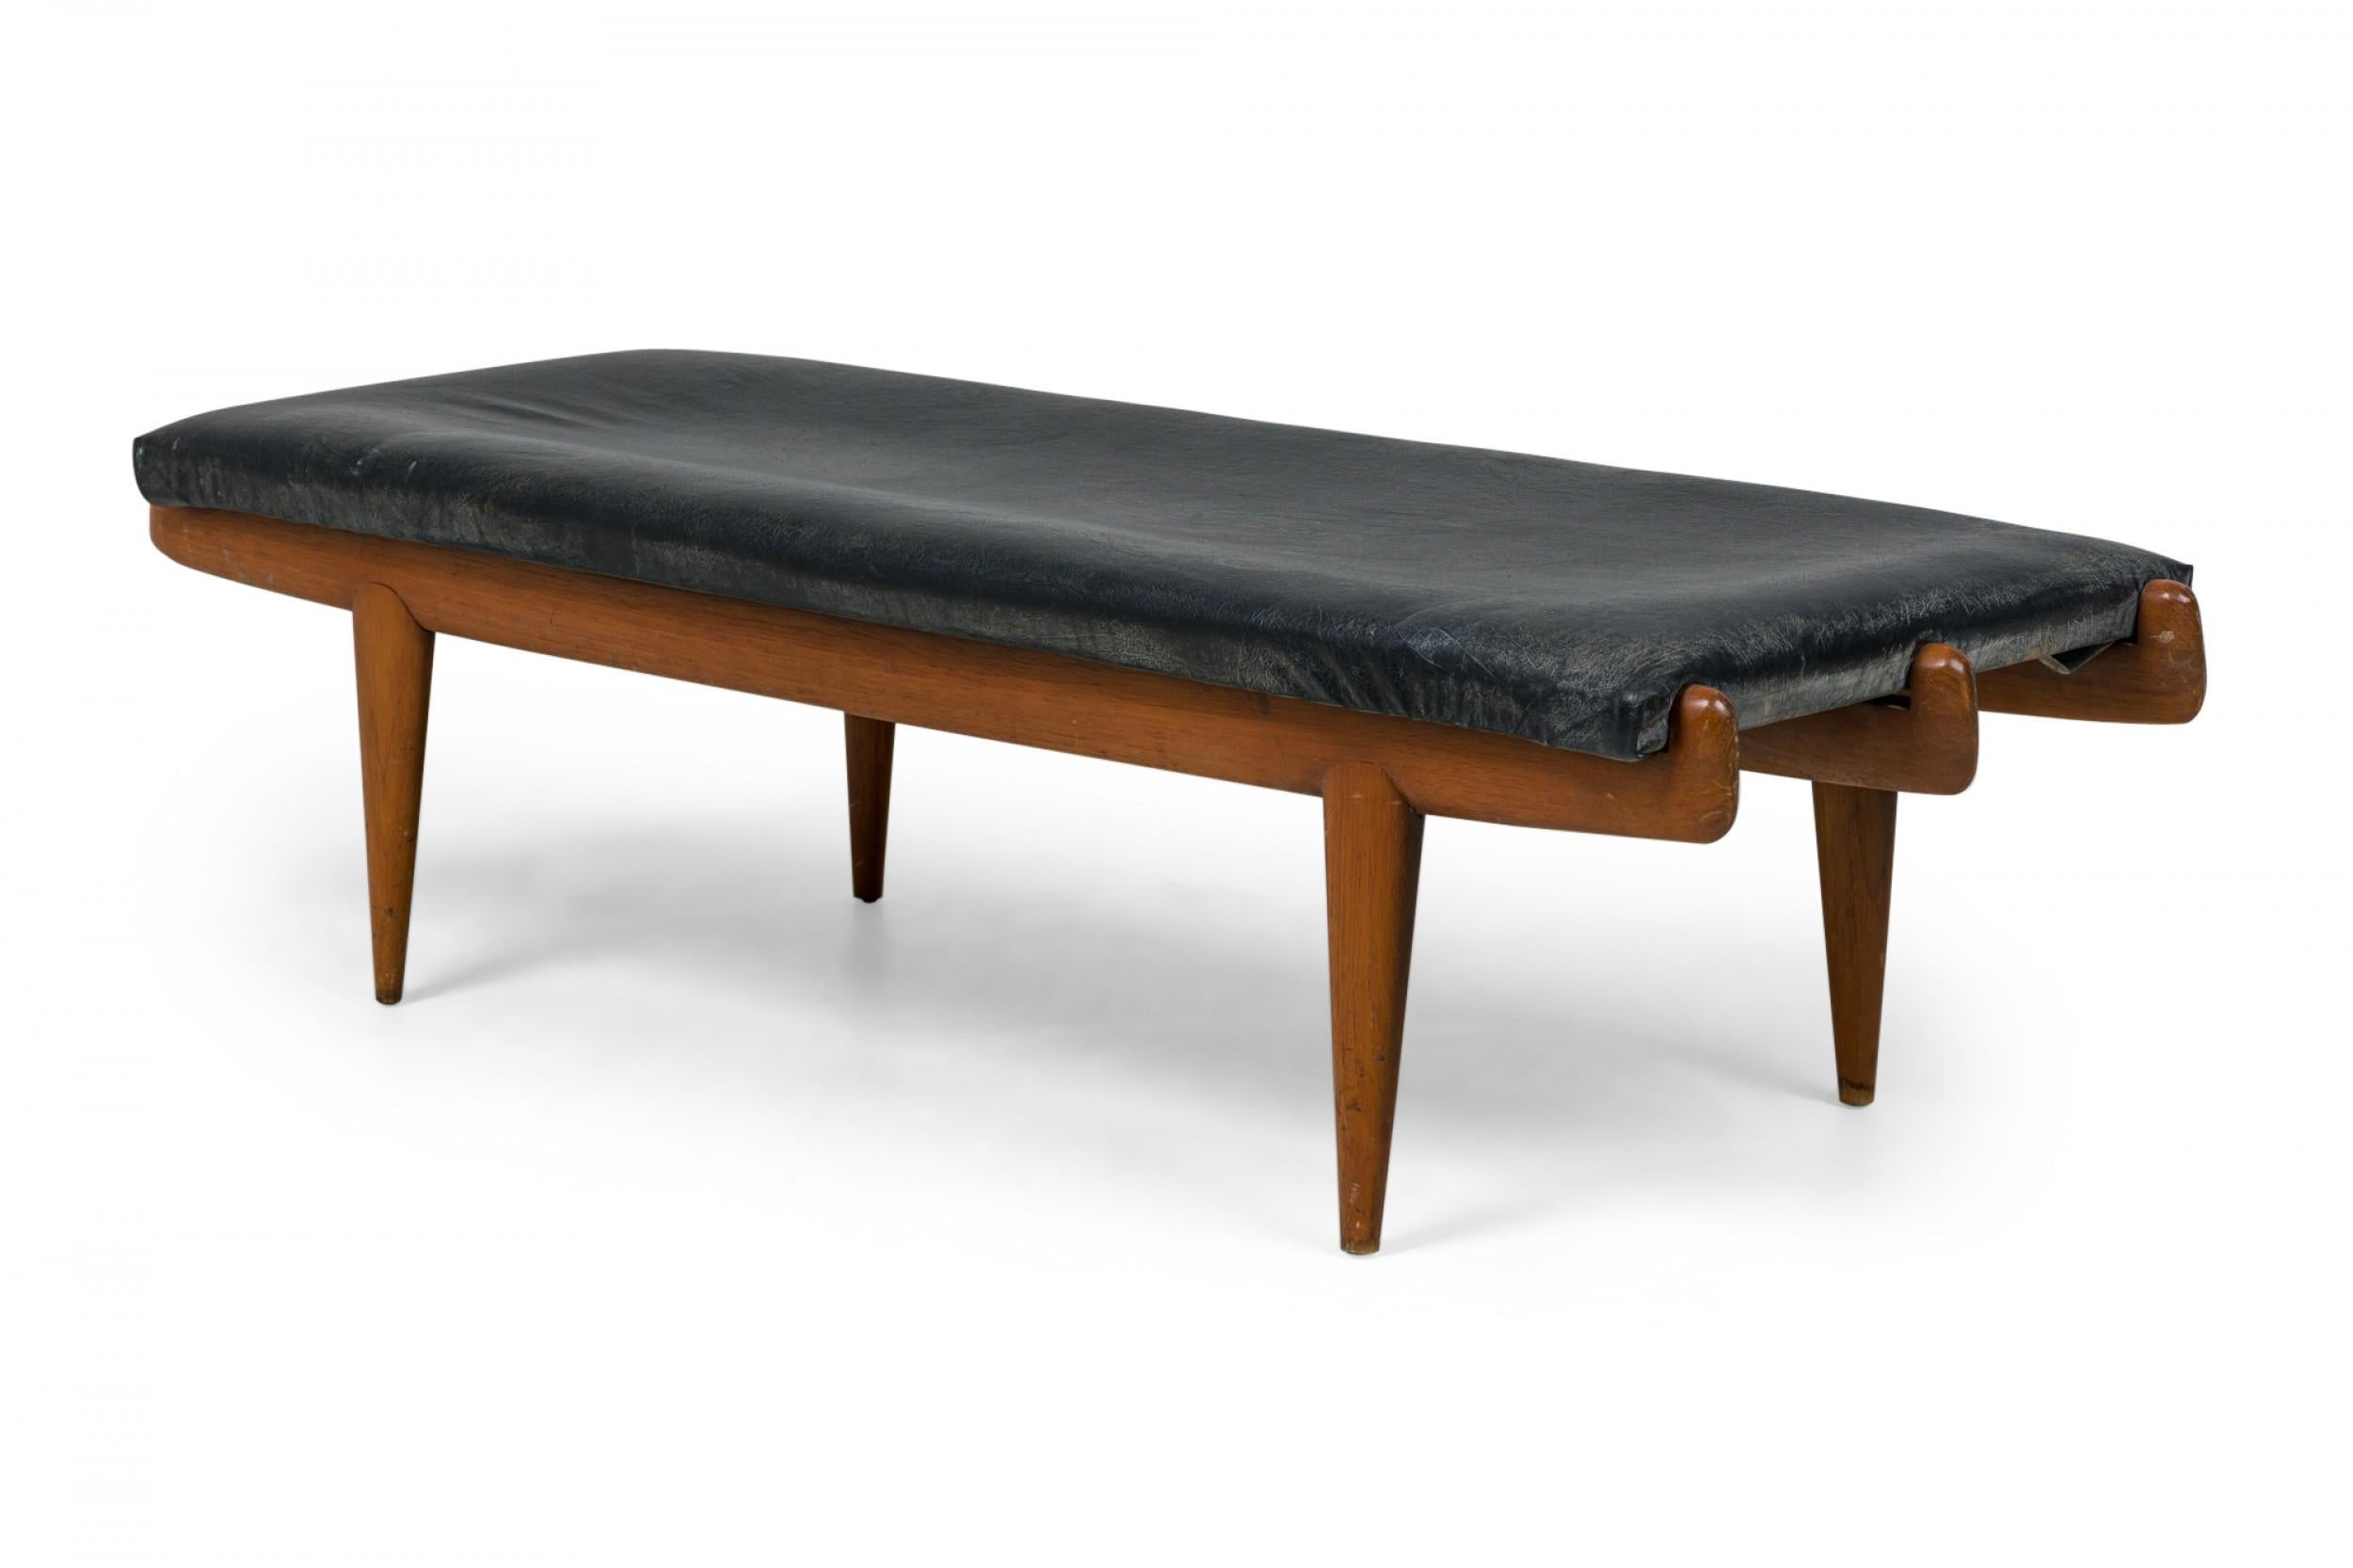 Midcentury Italian Modern walnut bench in sculptural form features a 3-row frame with rounded edges, rectangular seat cushion upholstered in black leather, standing on 4 short conical legs. (Vittorio Dassi).